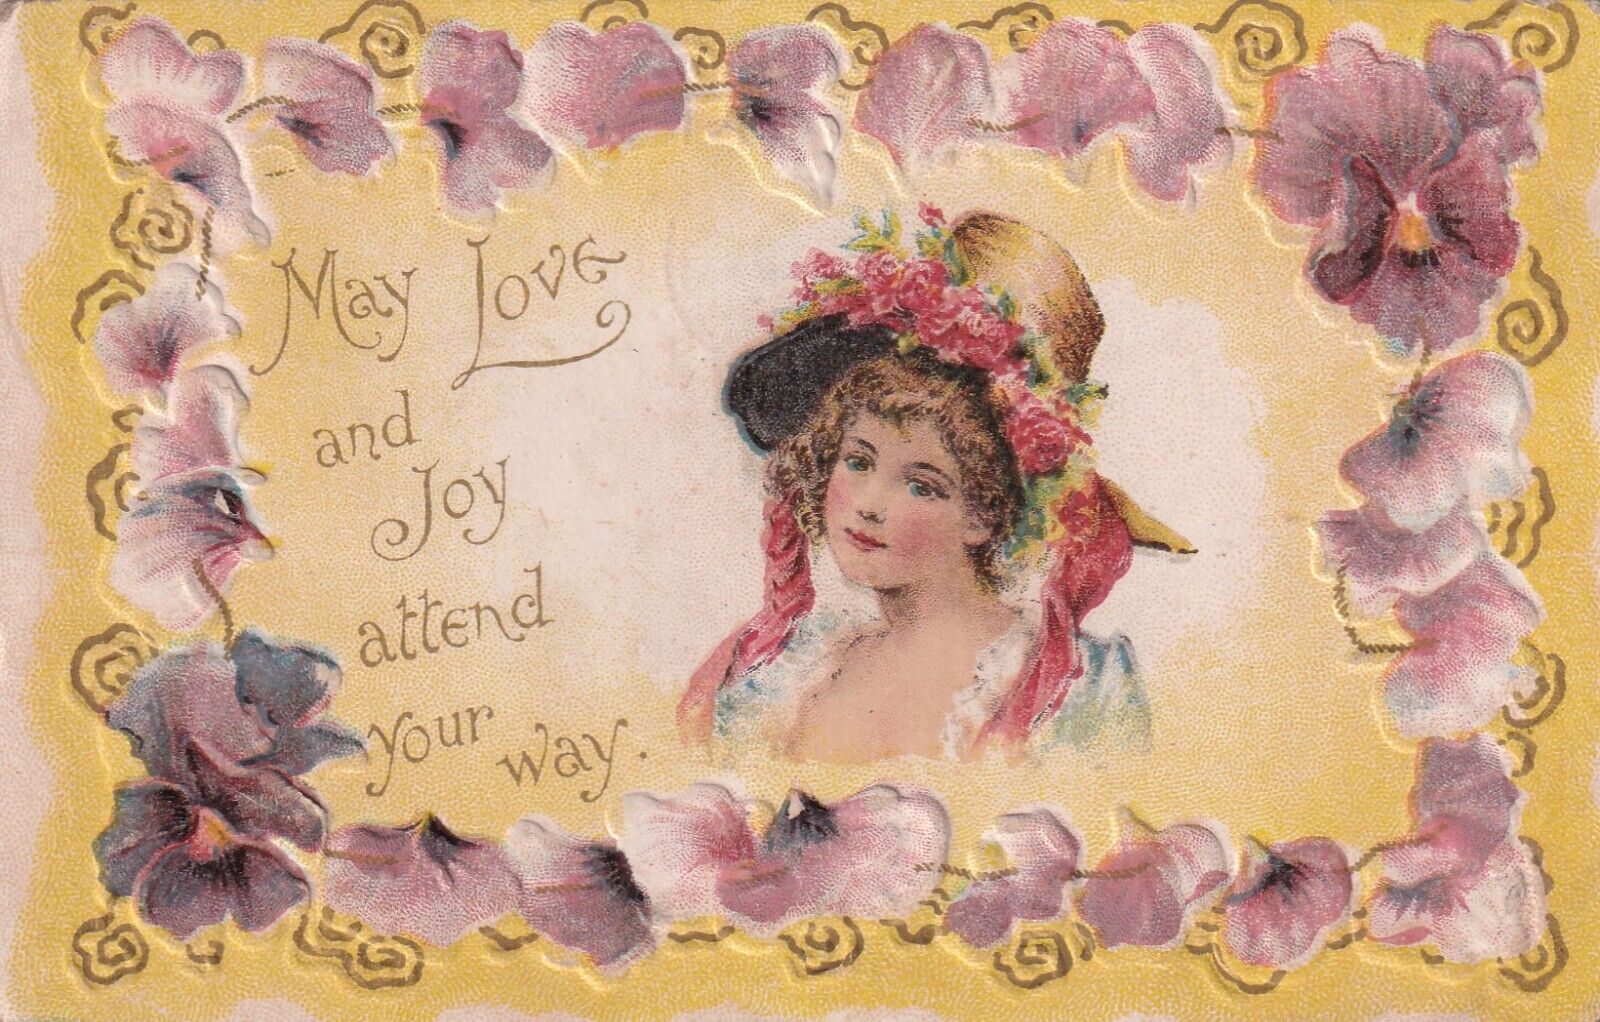 1908 MAY LOVE AND JOY ATTEND YOUR WAY, BEN FRANKLIN STAMP